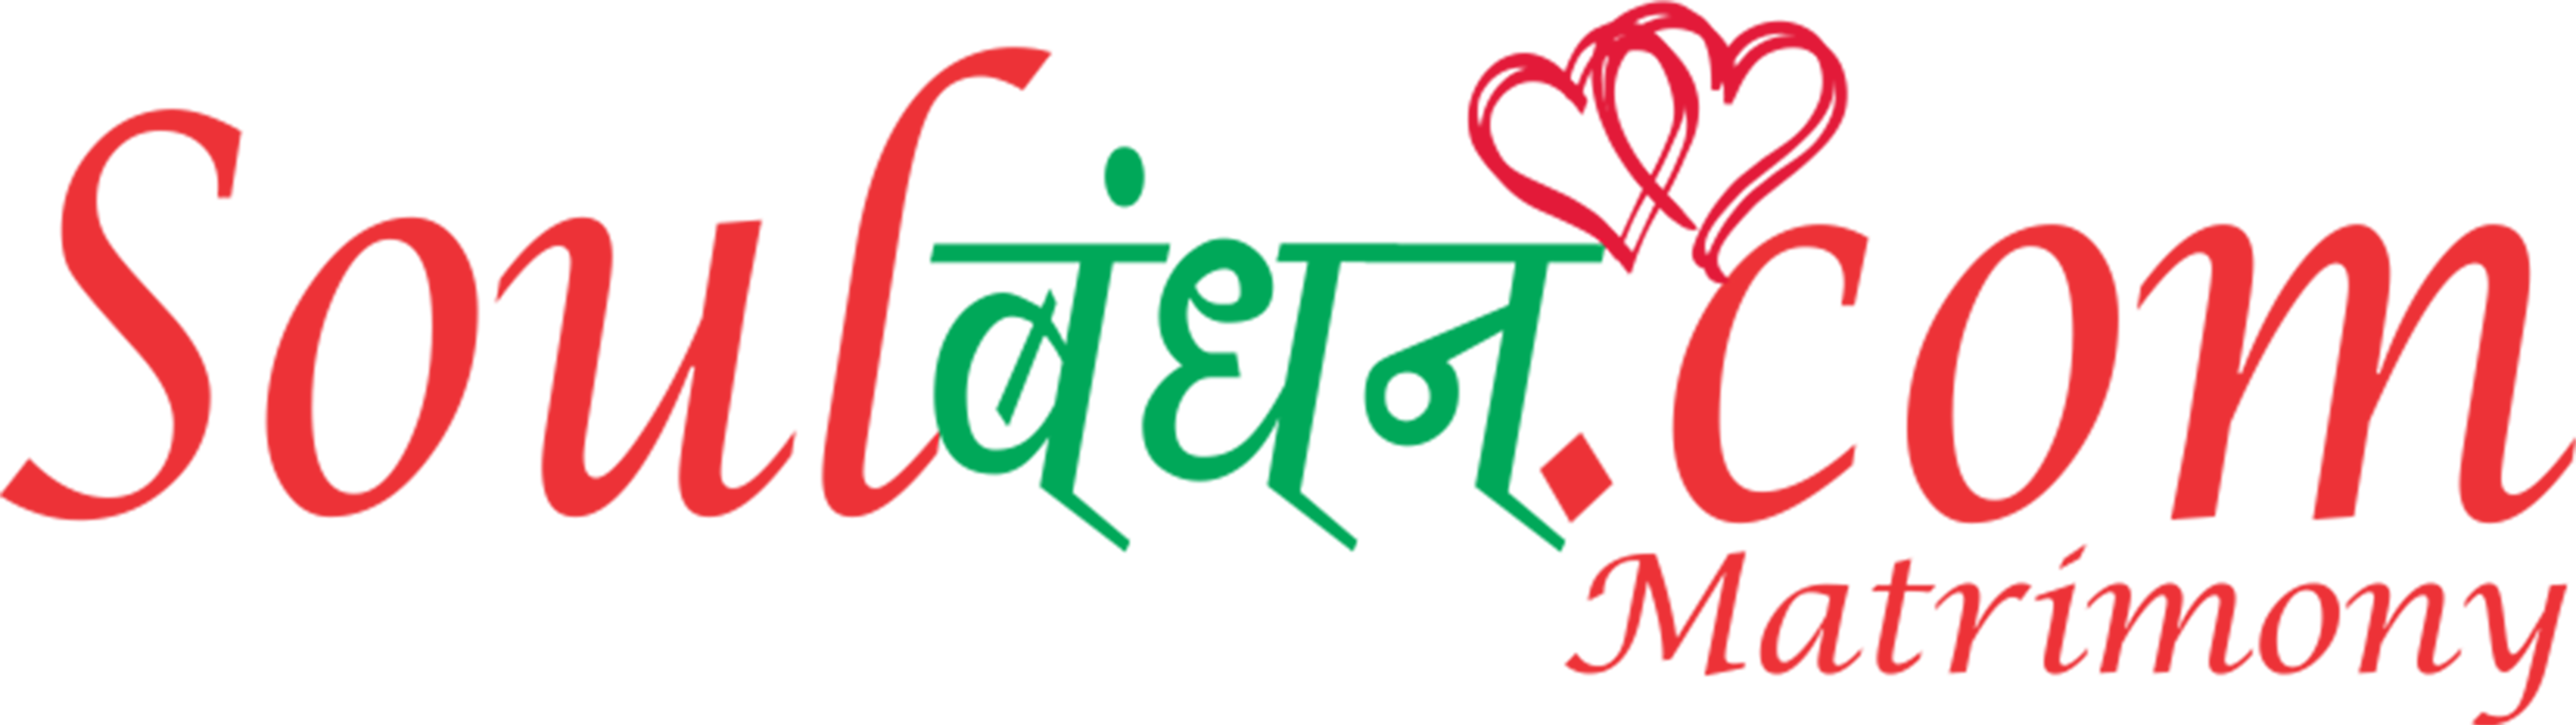 marriage clipart bandhan